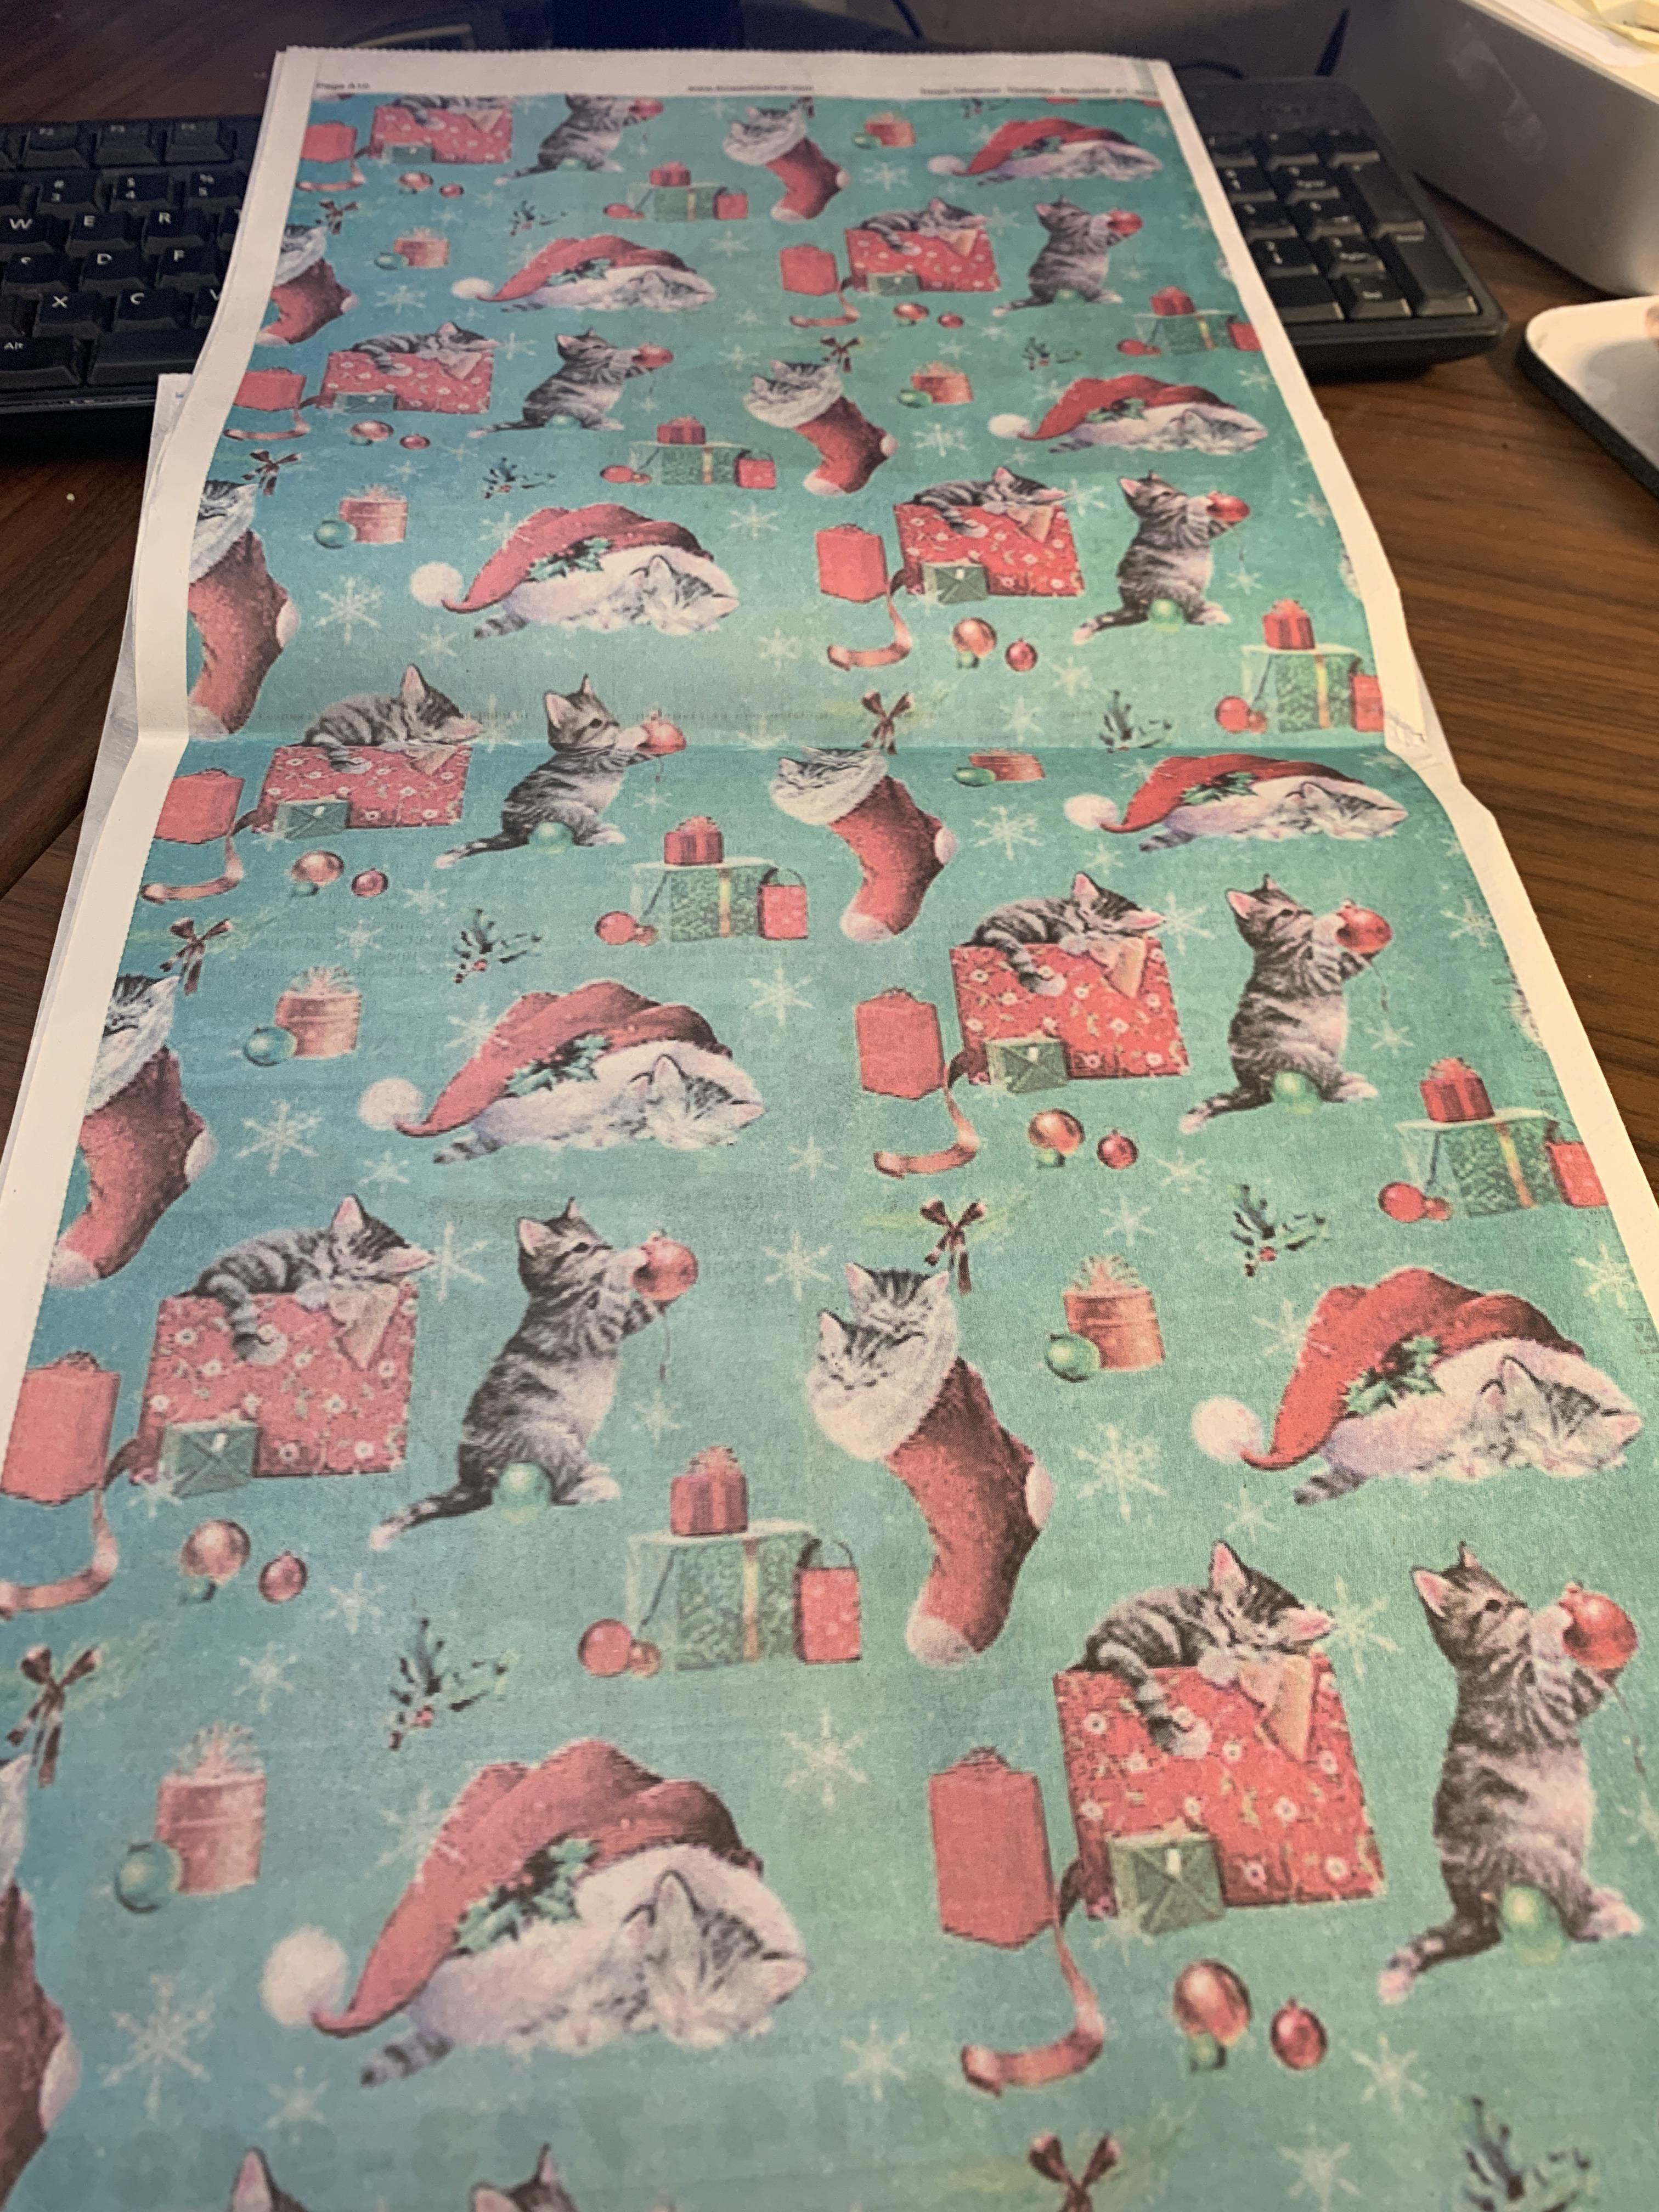 Local newspaper has a full page of cats for wrapping paper.  Online news can't compete with that.